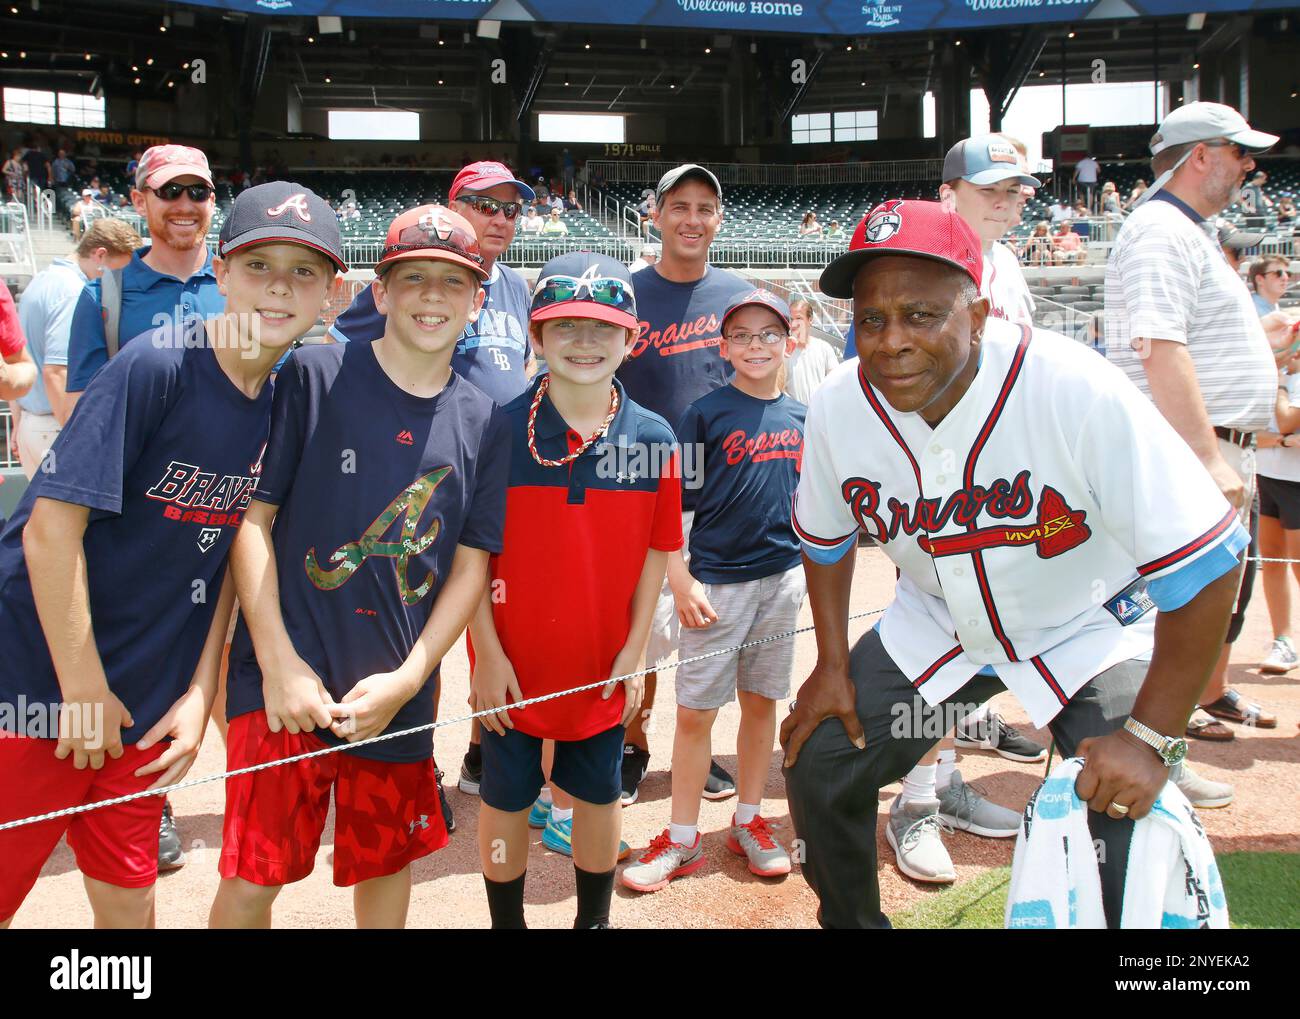 ATLANTA, GA - AUGUST 06: Former Braves player, Ralph Garr (r) takes a photo  with some young fans prior to the MLB game between the Atlanta Braves and  the Miami Marlins on